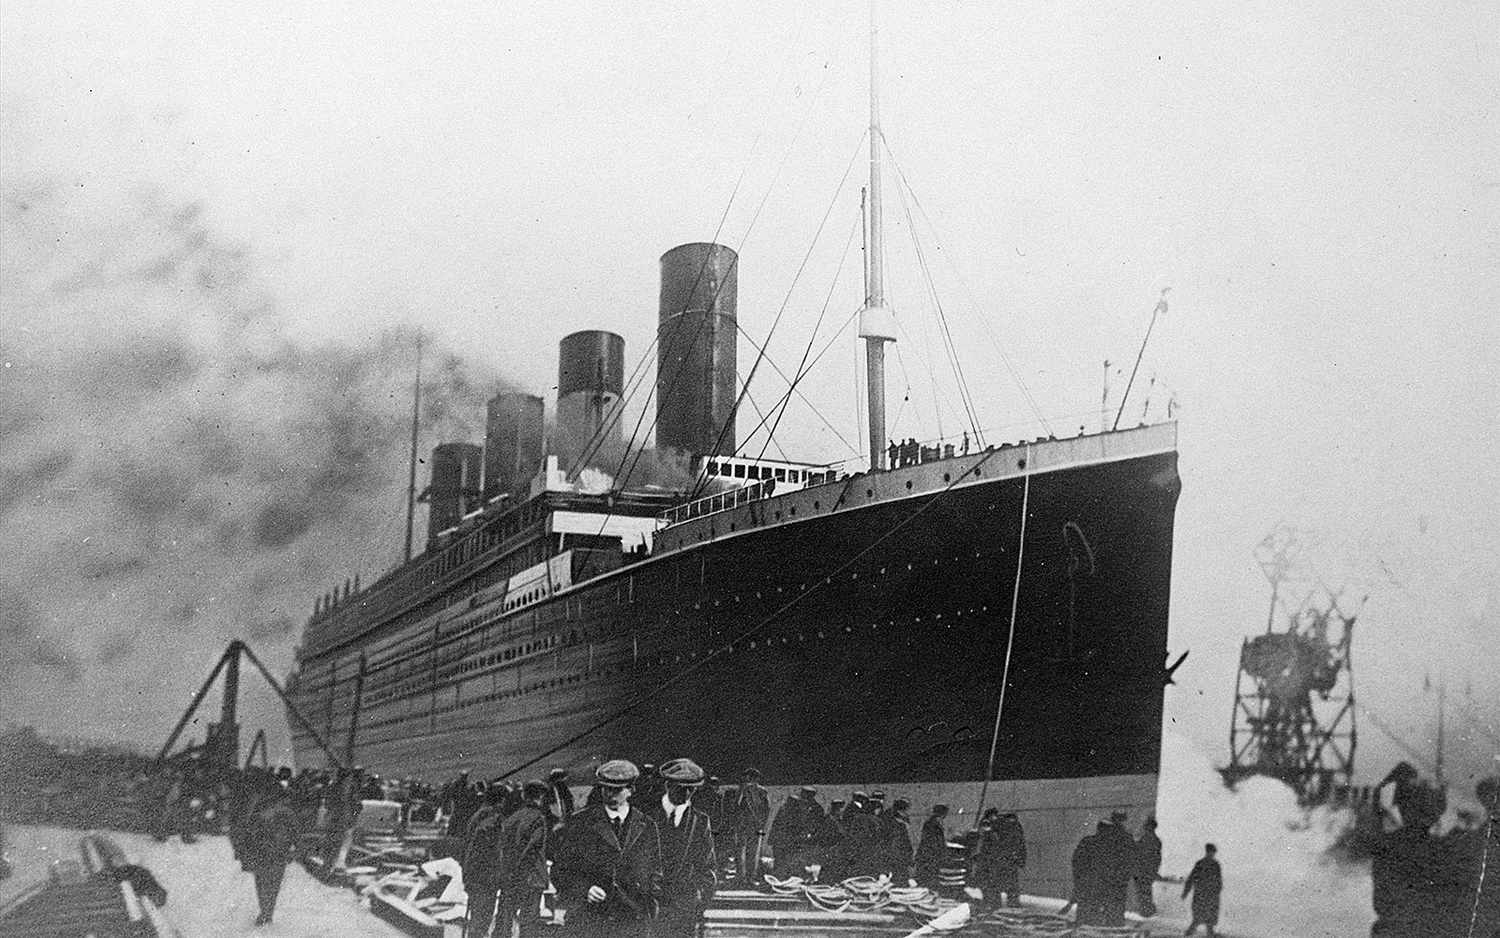 An Iceberg May Not Have Sunk The Titanic After All